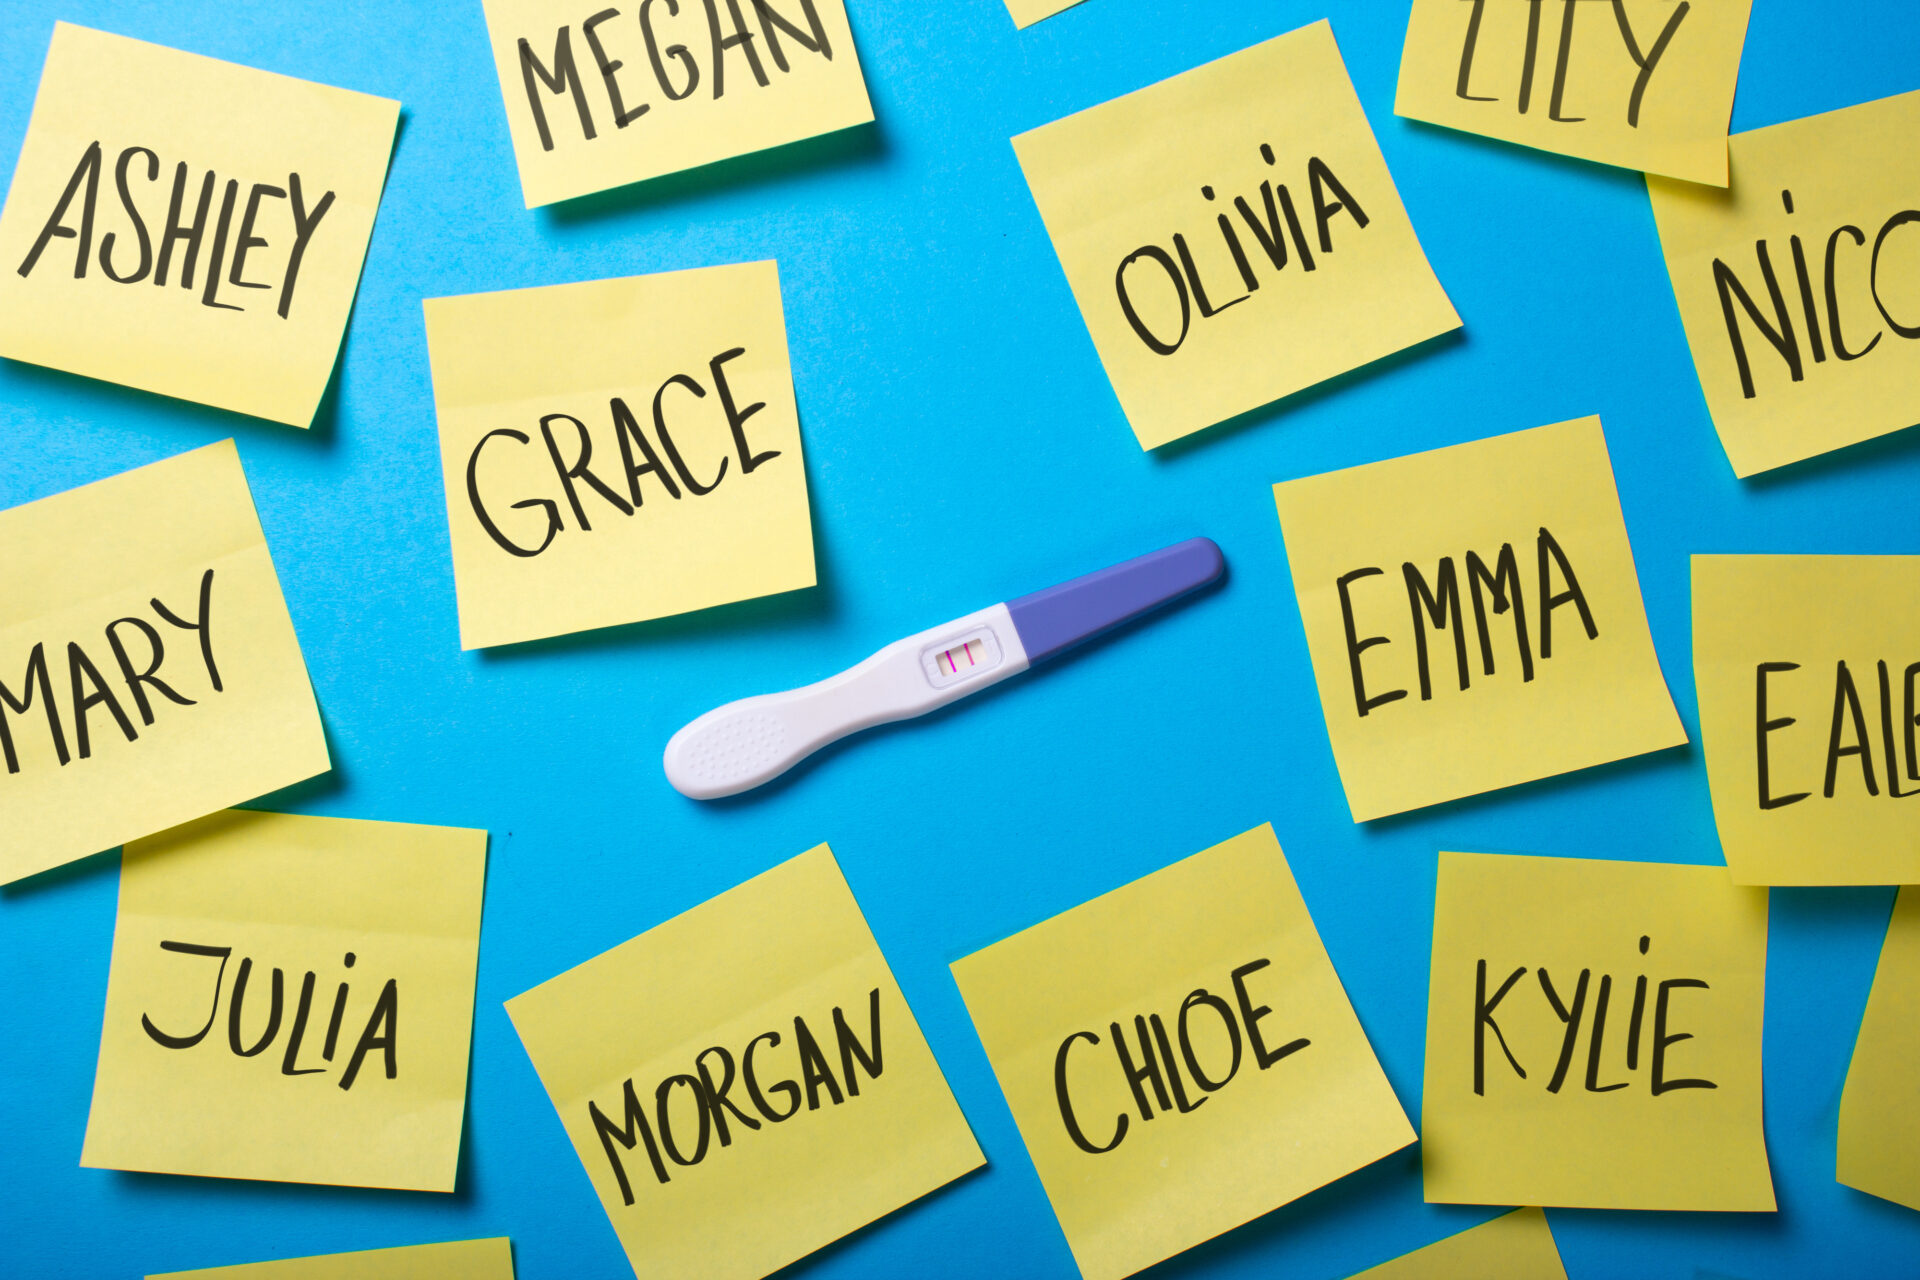 Celebrity baby names on Post-its around pregnancy test